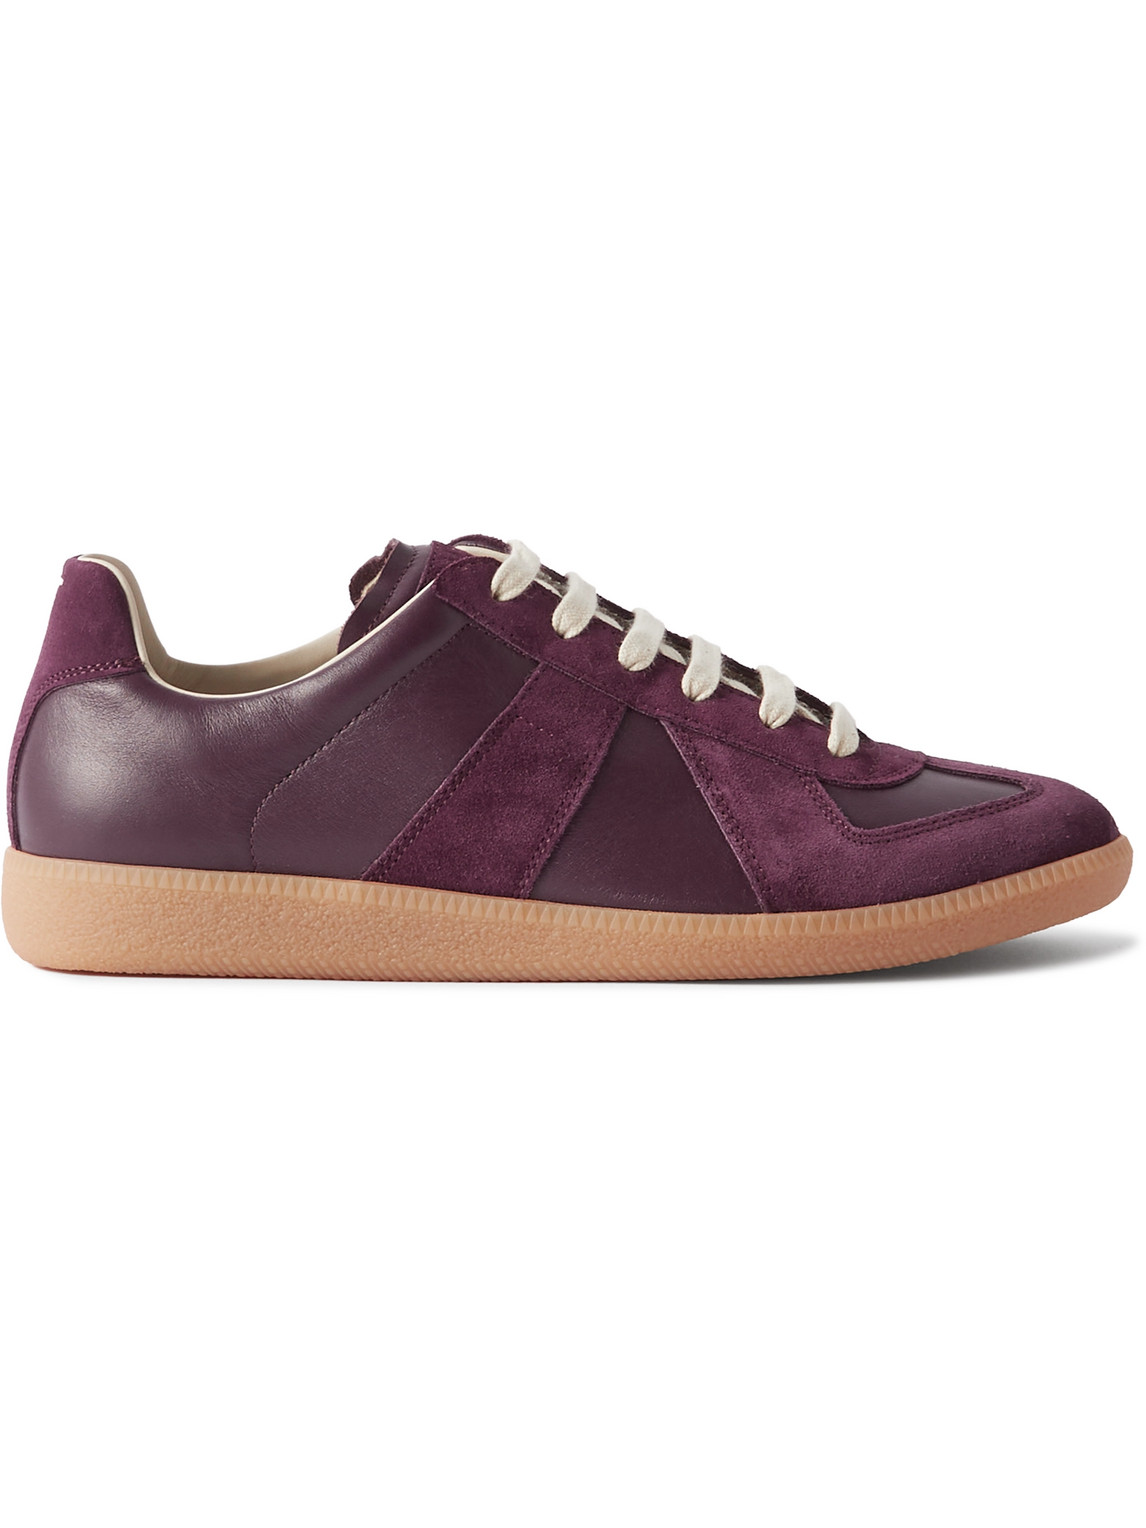 Maison Margiela Replica Leather And Suede Sneakers In Burgundy